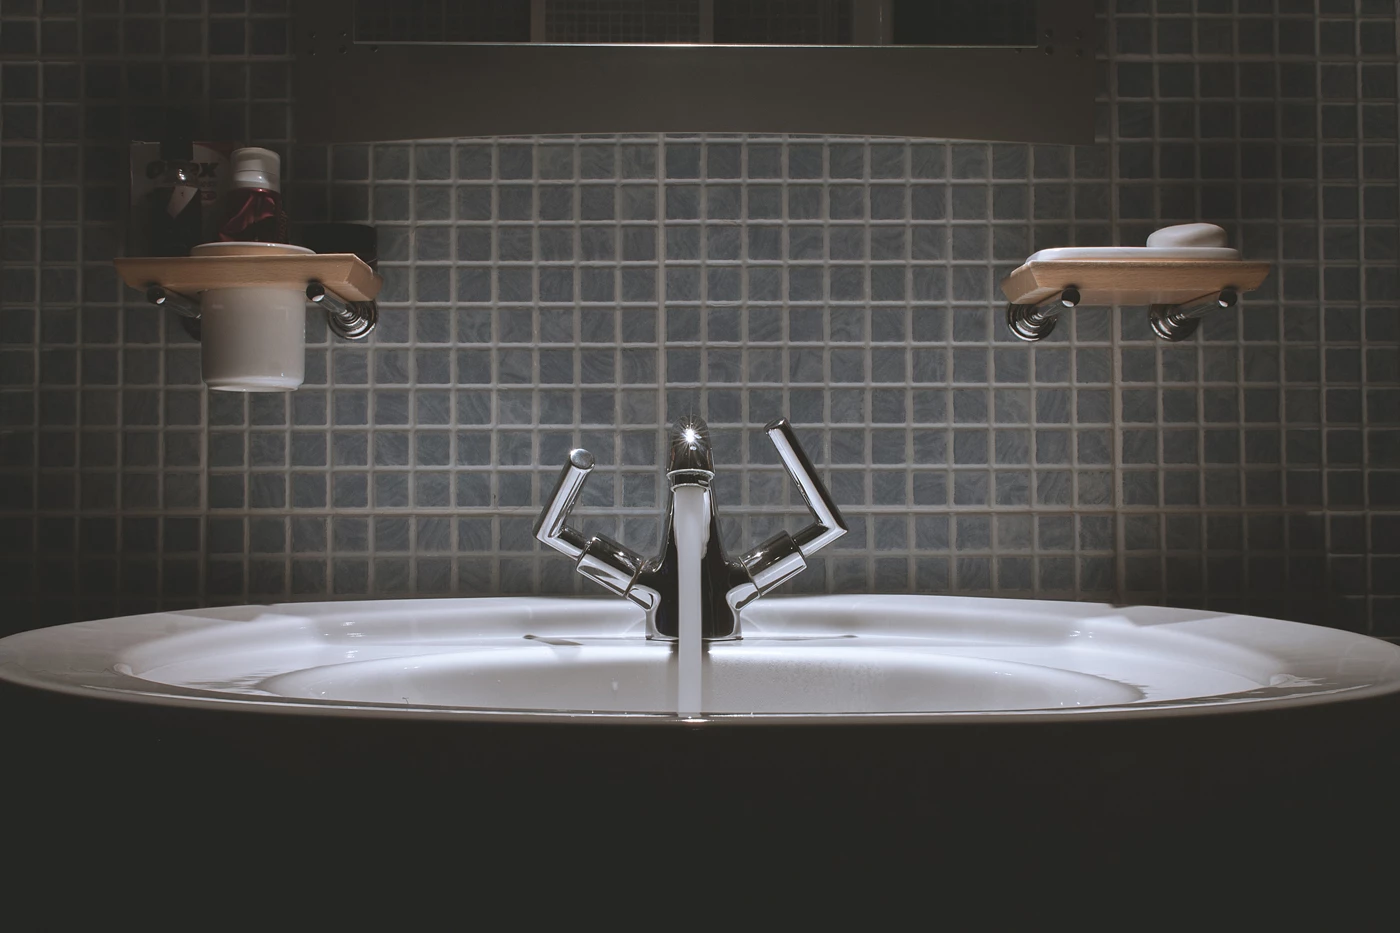 A sink in a bathroom with the tap left running